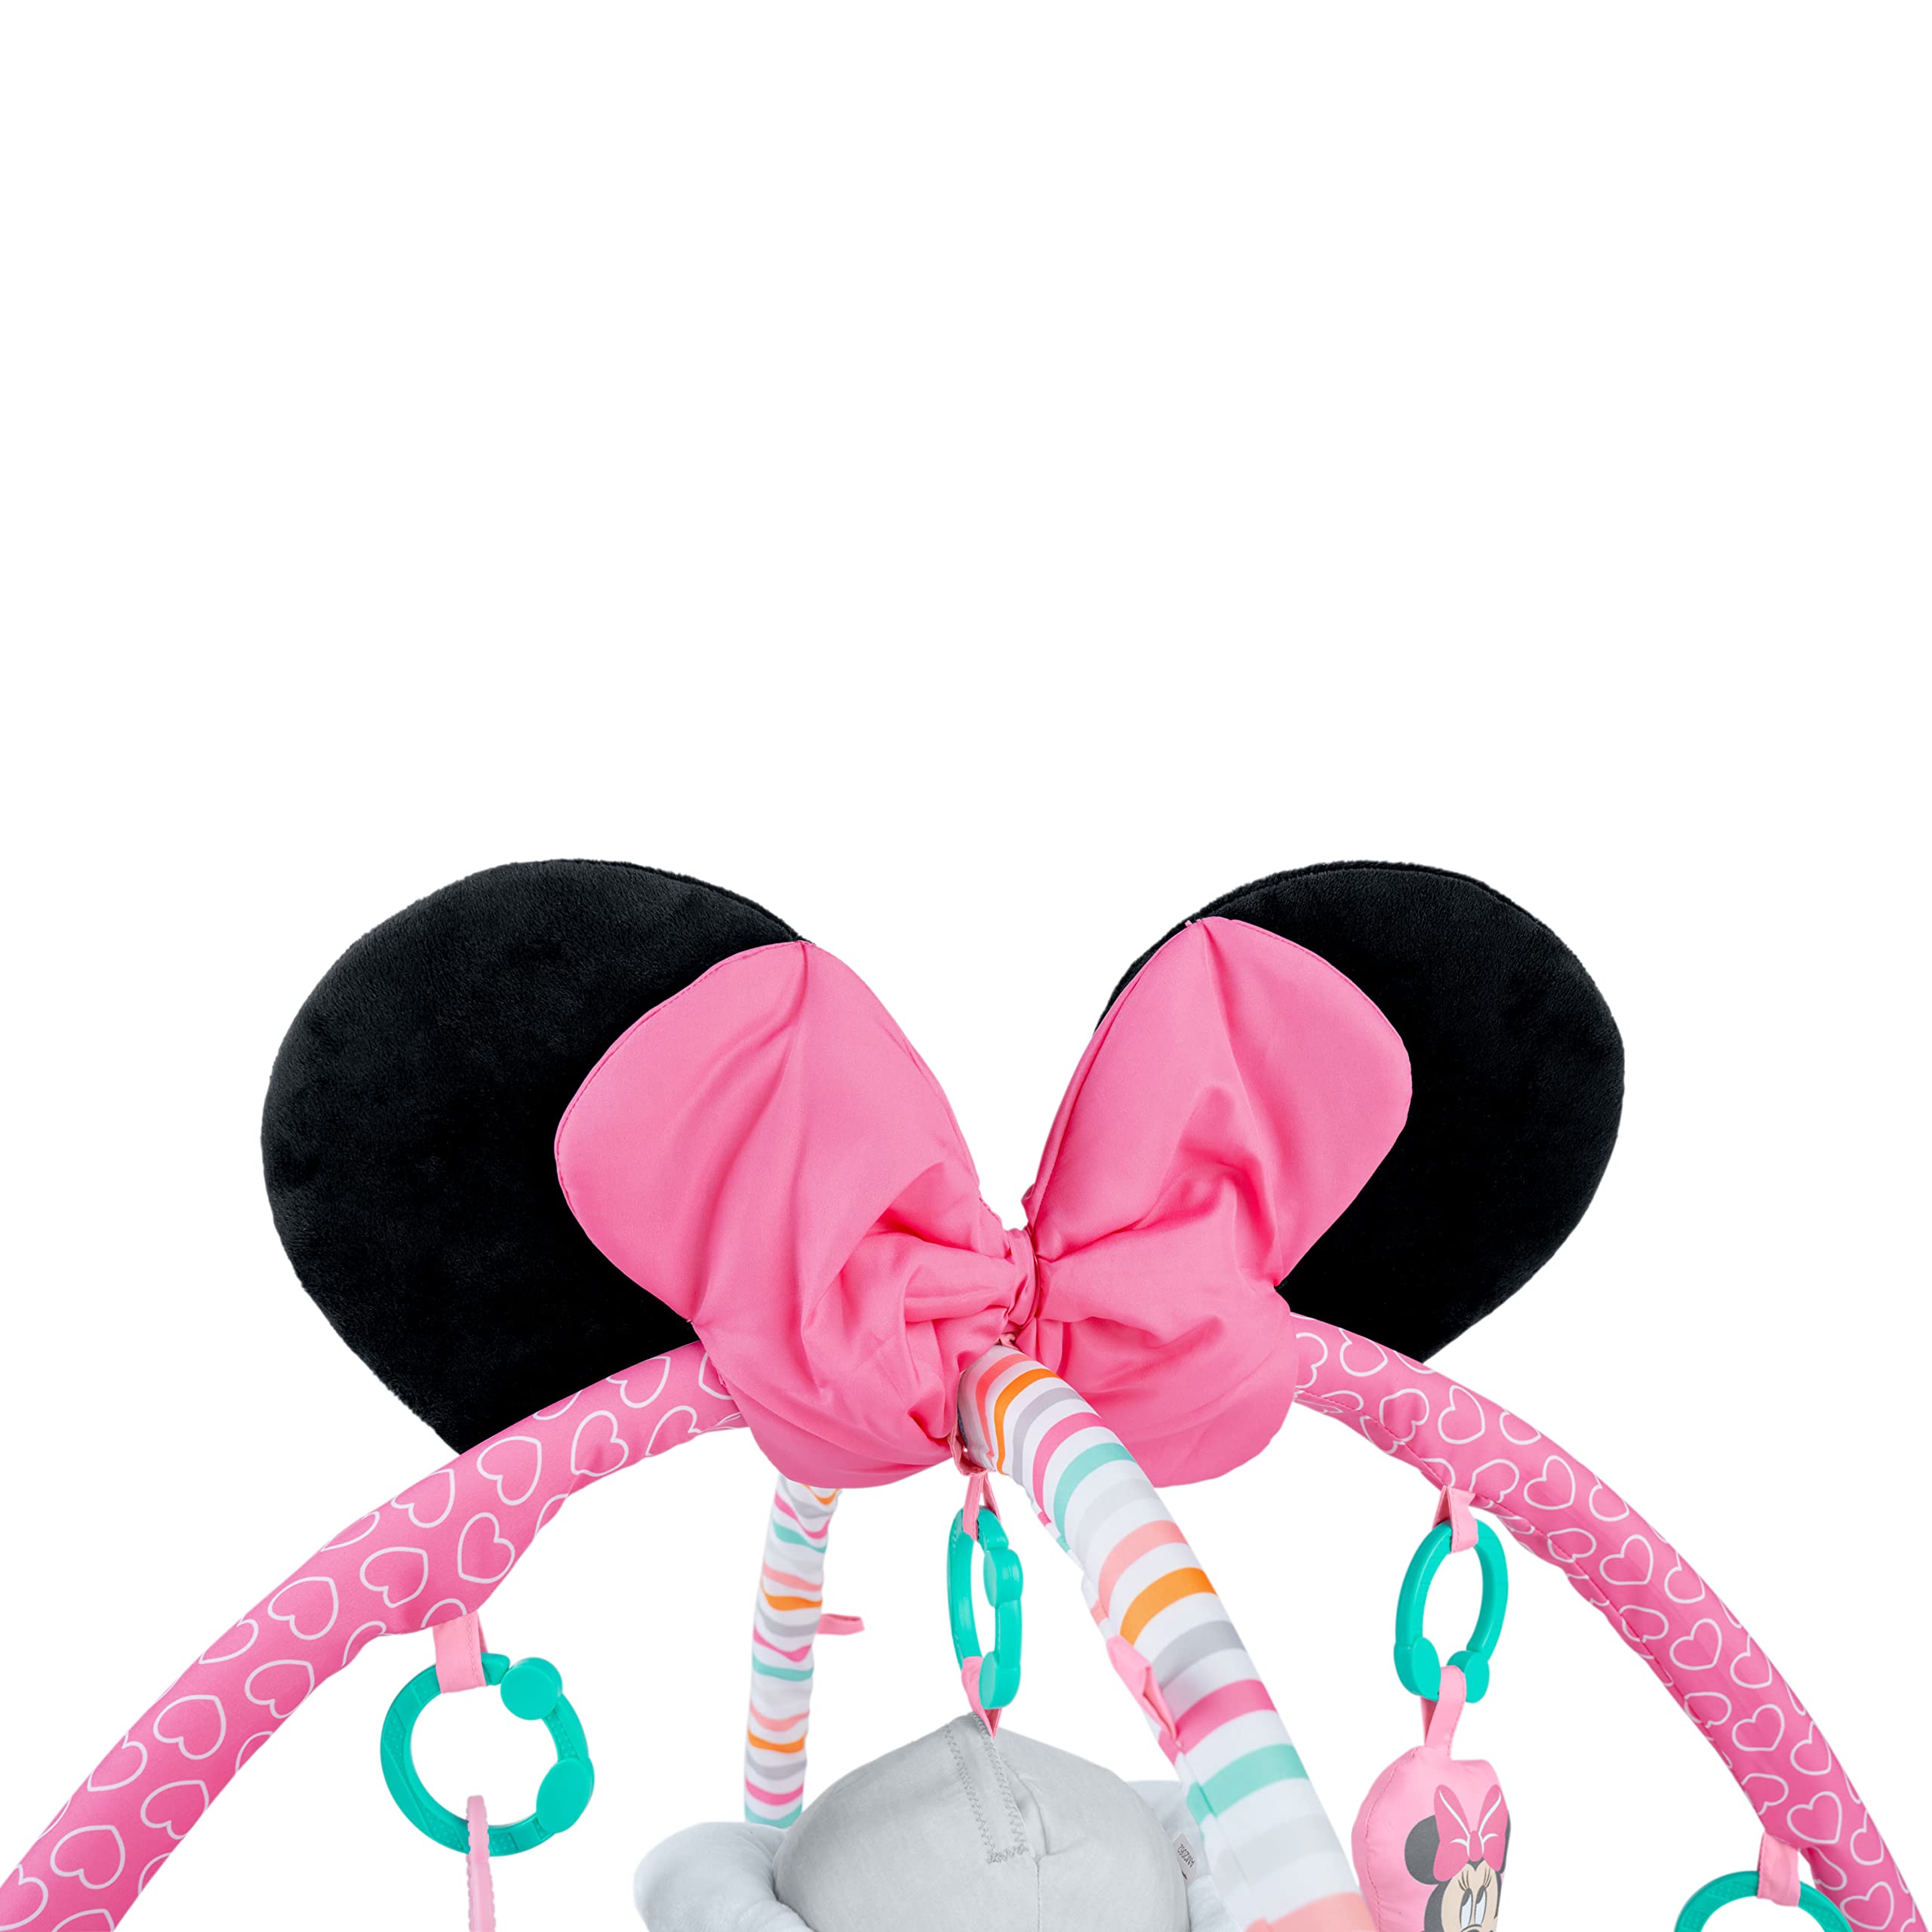 Bright Starts Disney Baby Minnie Mouse Forever Besties Activity Gym with Music and Lights, Pink, Newborn+